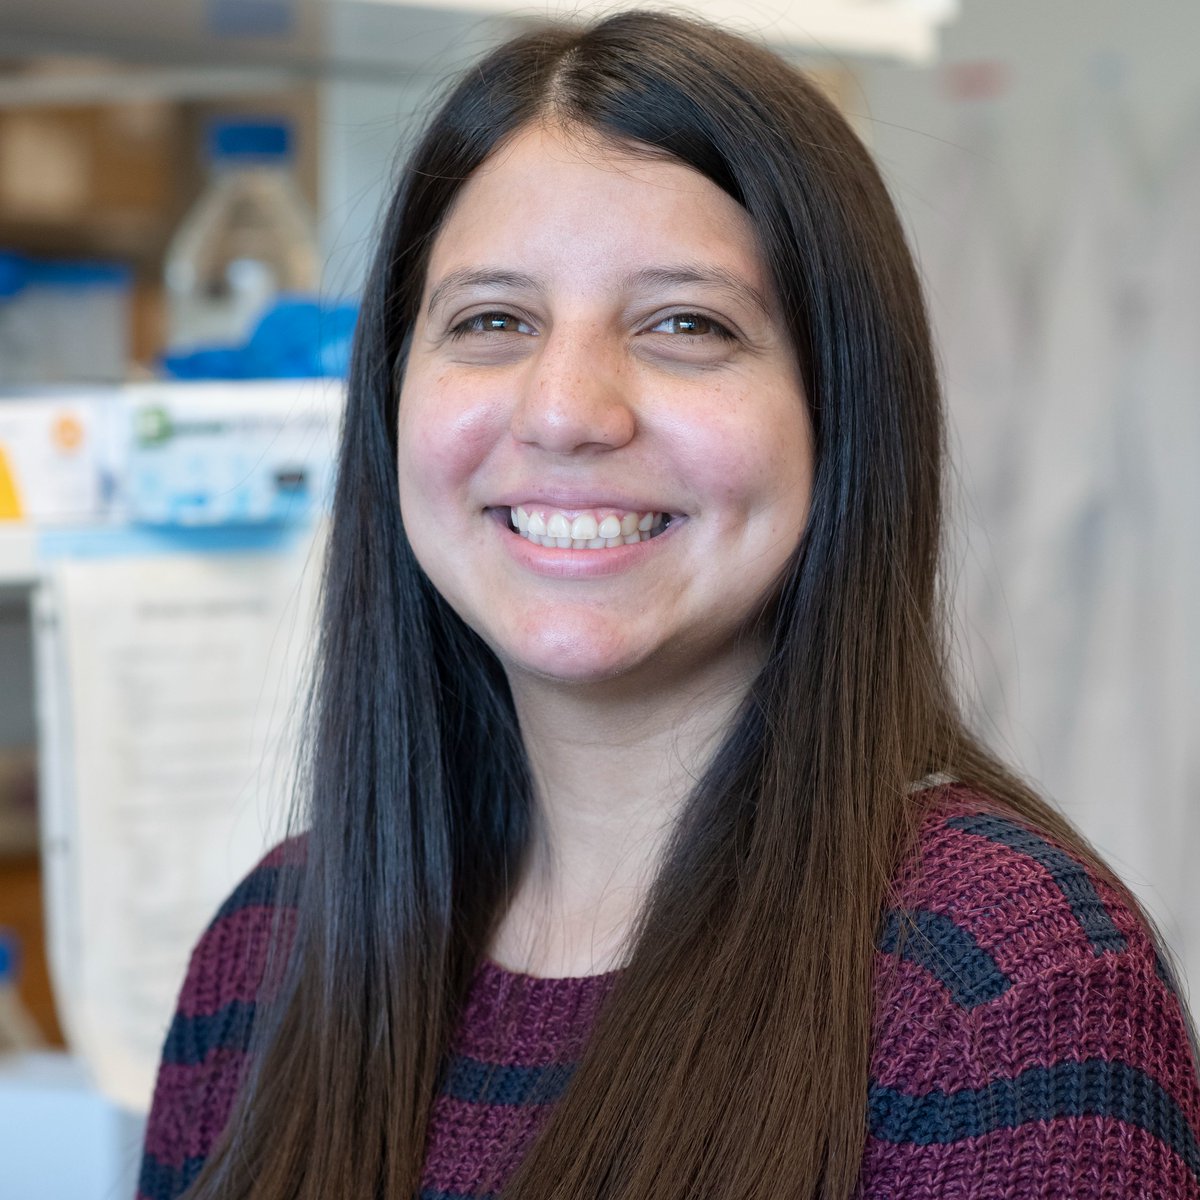 The Breast Cancer Coalition has awarded $100,000 in research grants to 3 local researchers. @ndsempertegui, PhD Candidate, @Cornell was awarded the 2023 Pamela Delp Polashenski MD Breast Cancer Research Trainee Grant ($25,000). Congratulations Nicole! bccr.org/research/